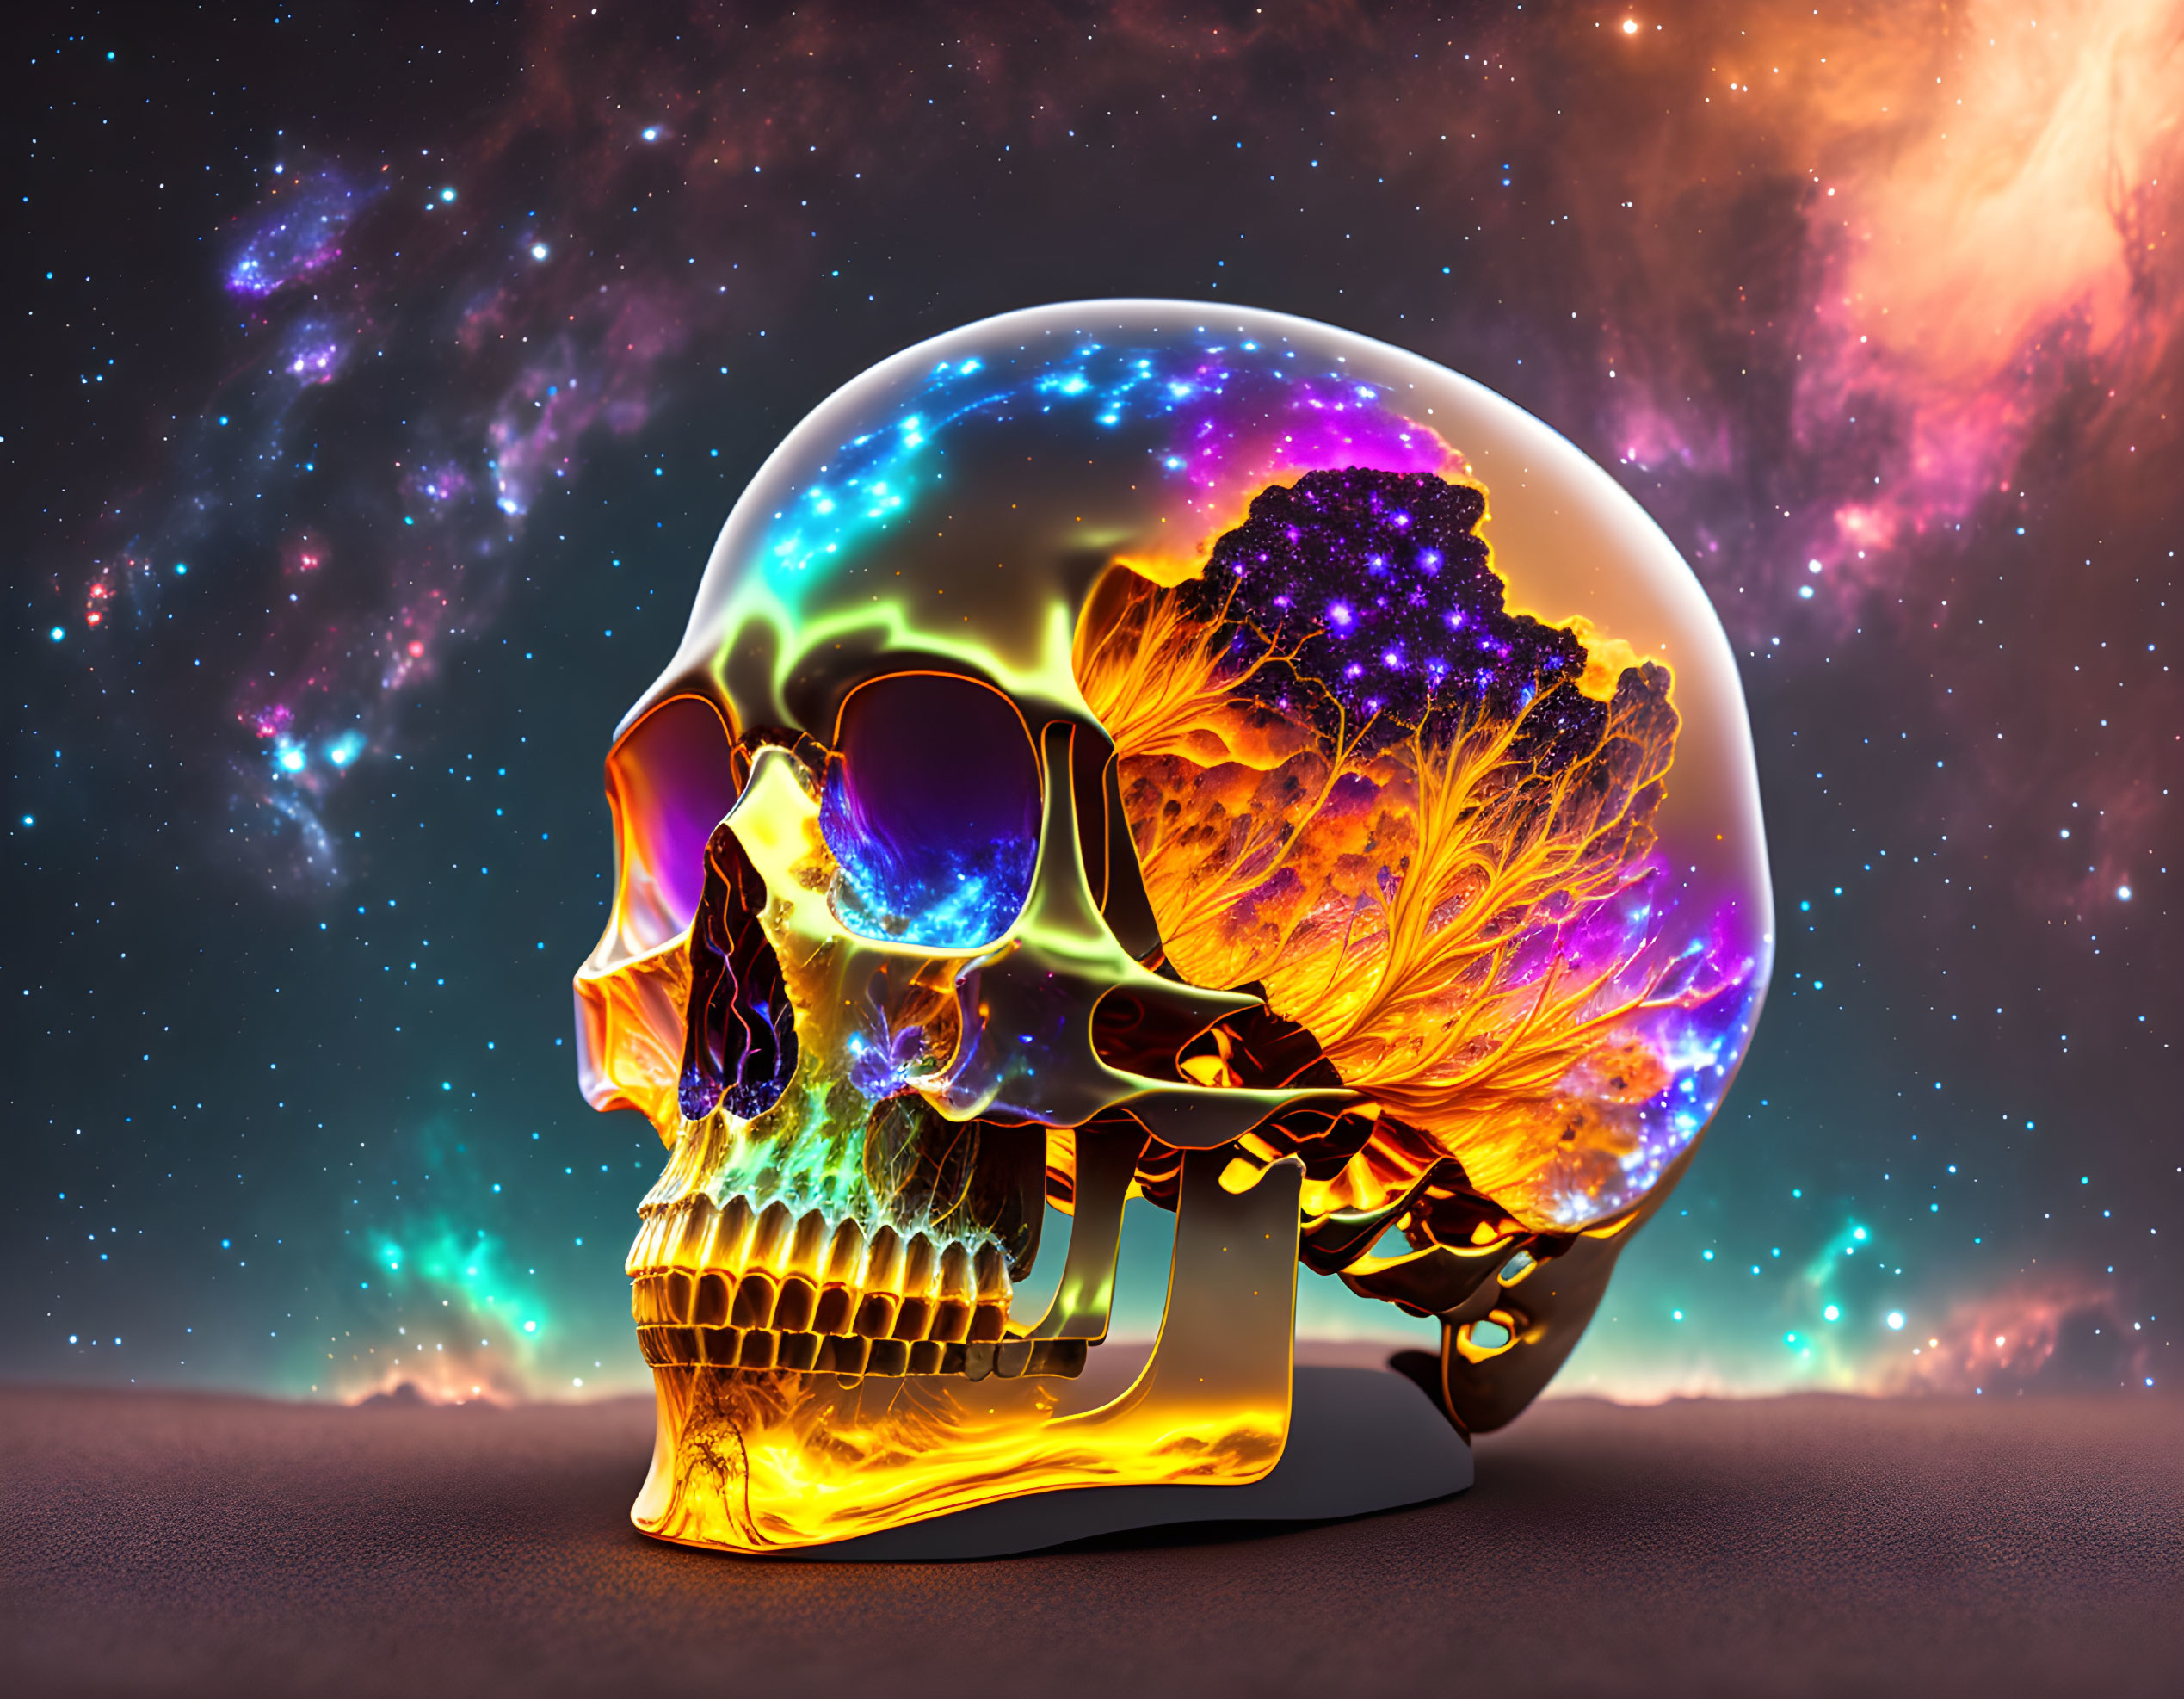 Transparent Skull with Vibrant Colors on Cosmic Background